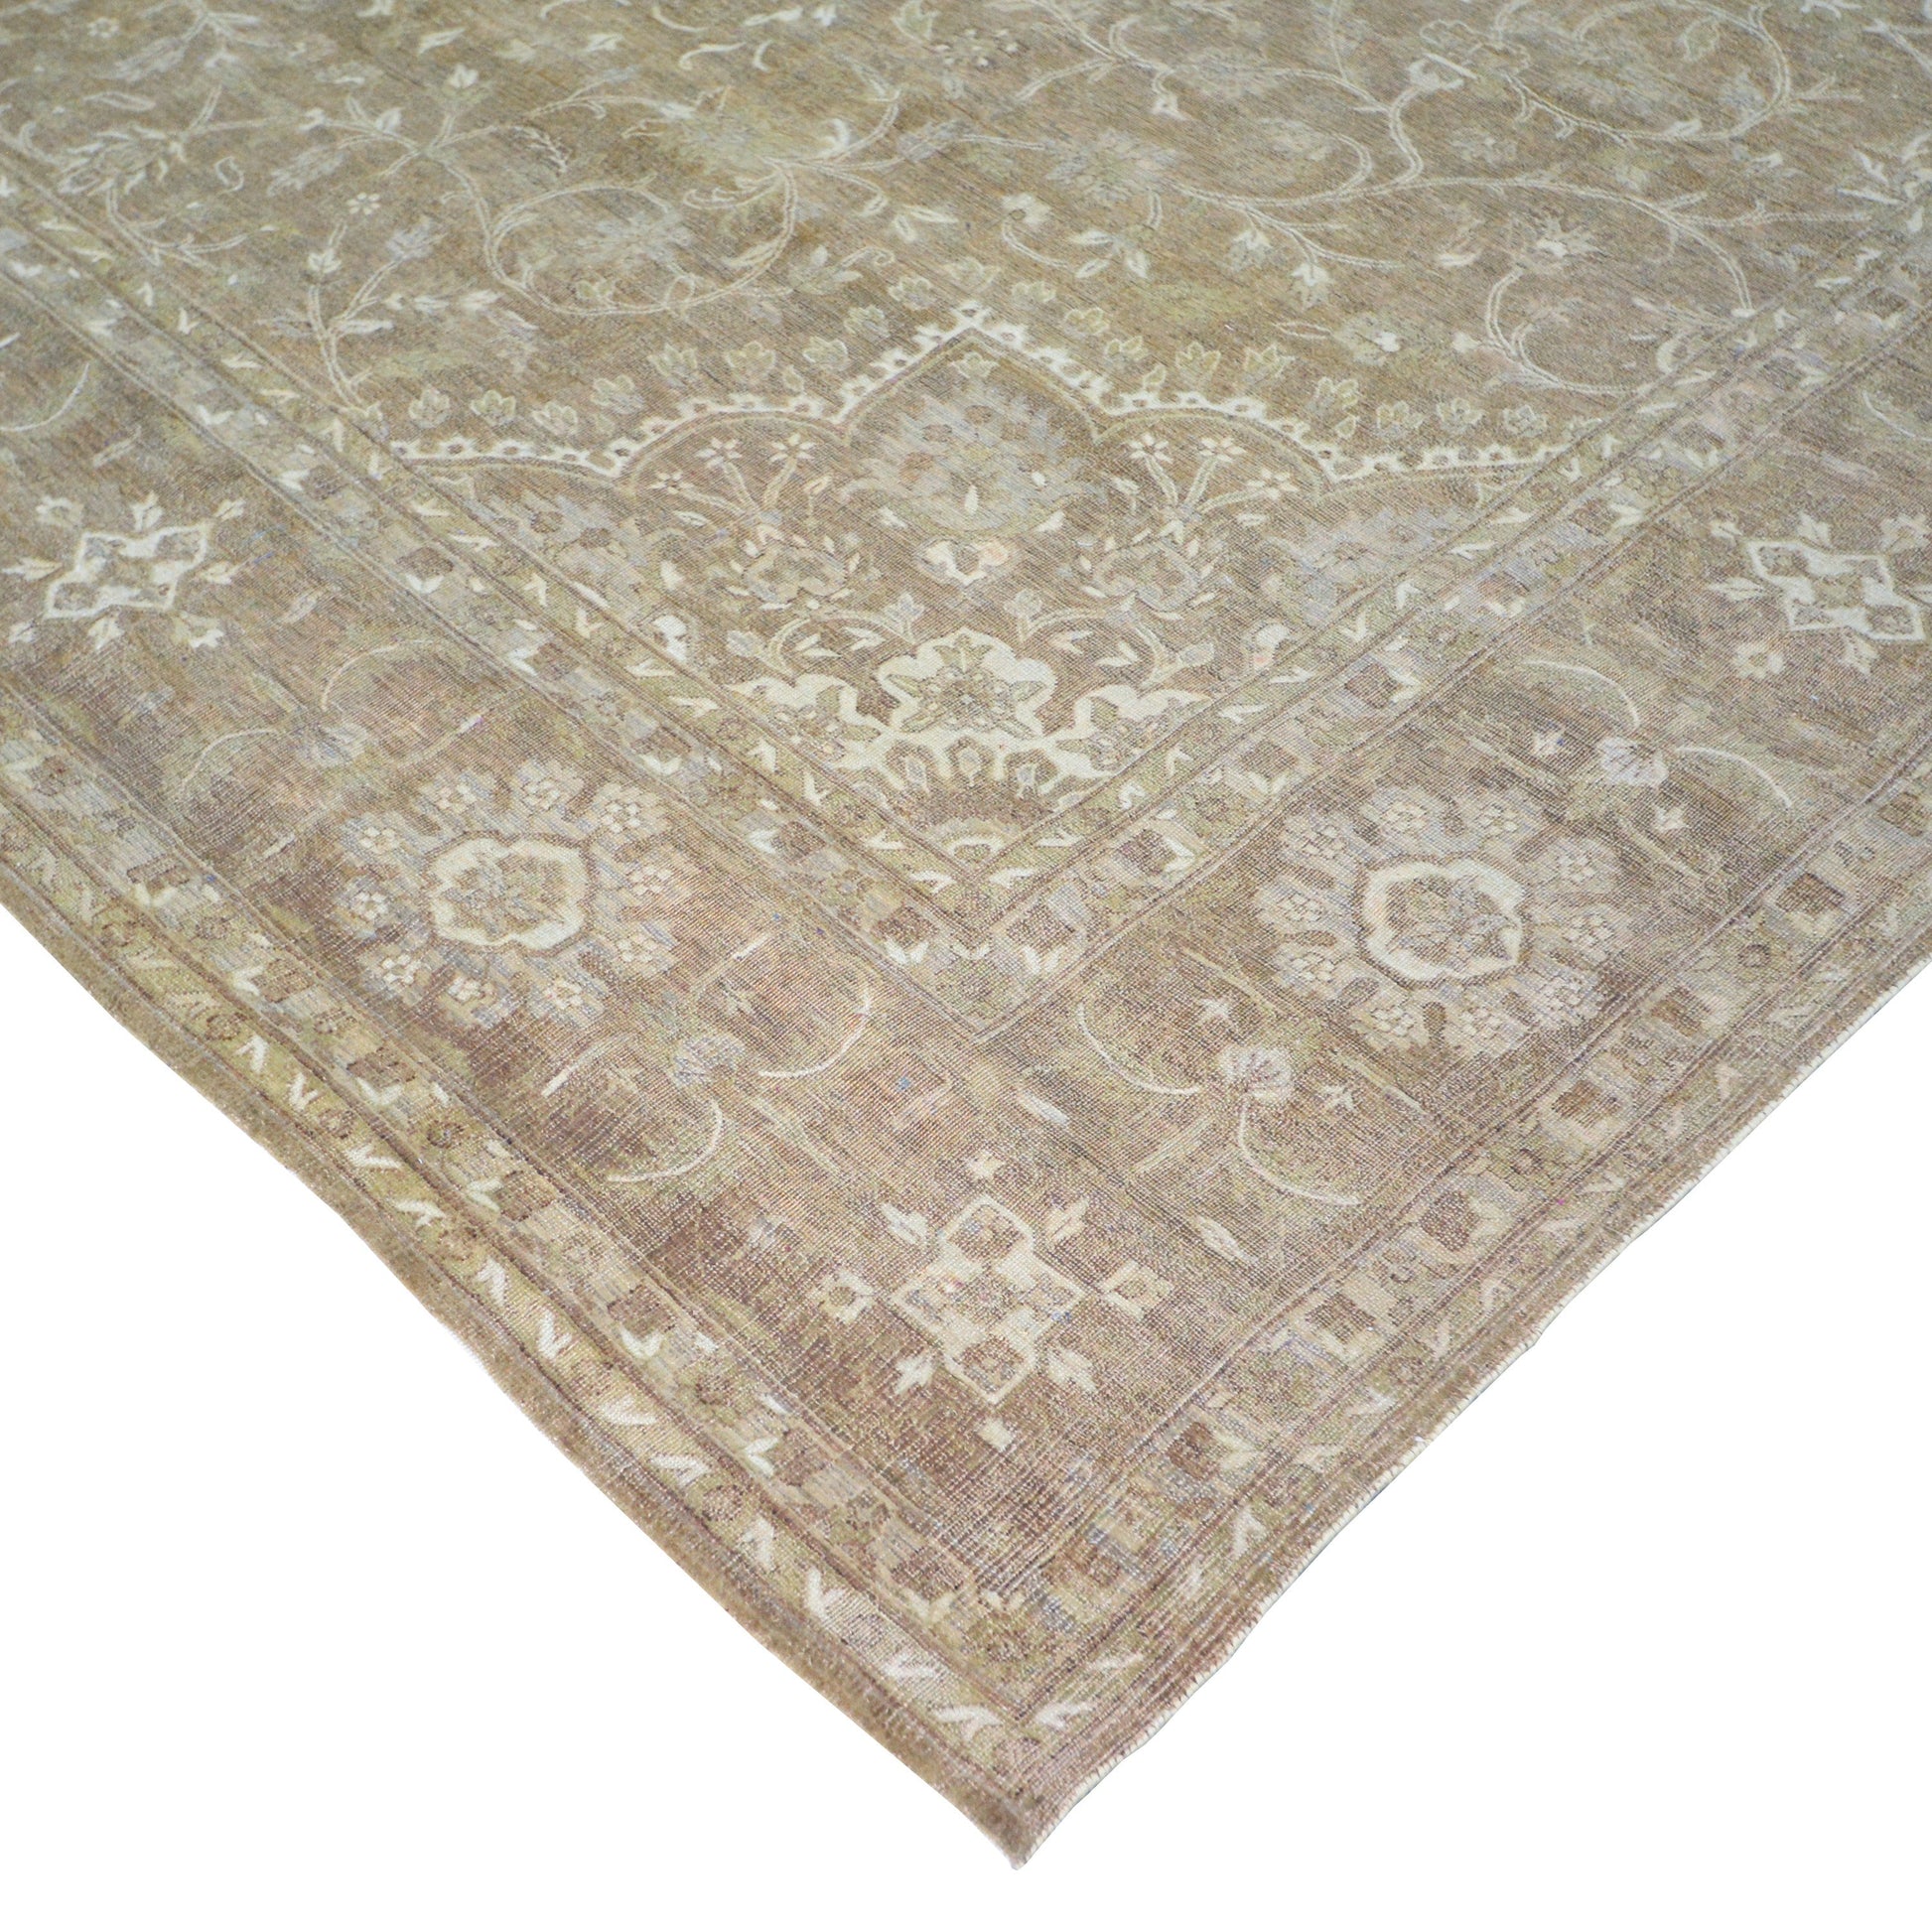 Get trendy with Floral Brown Ivory and Camel Traditional Persian Pure Wool Luxury Handknotted Area Rug - Traditional Rugs available at Jaipur Oriental Rugs. Grab yours for $3200.00 today!